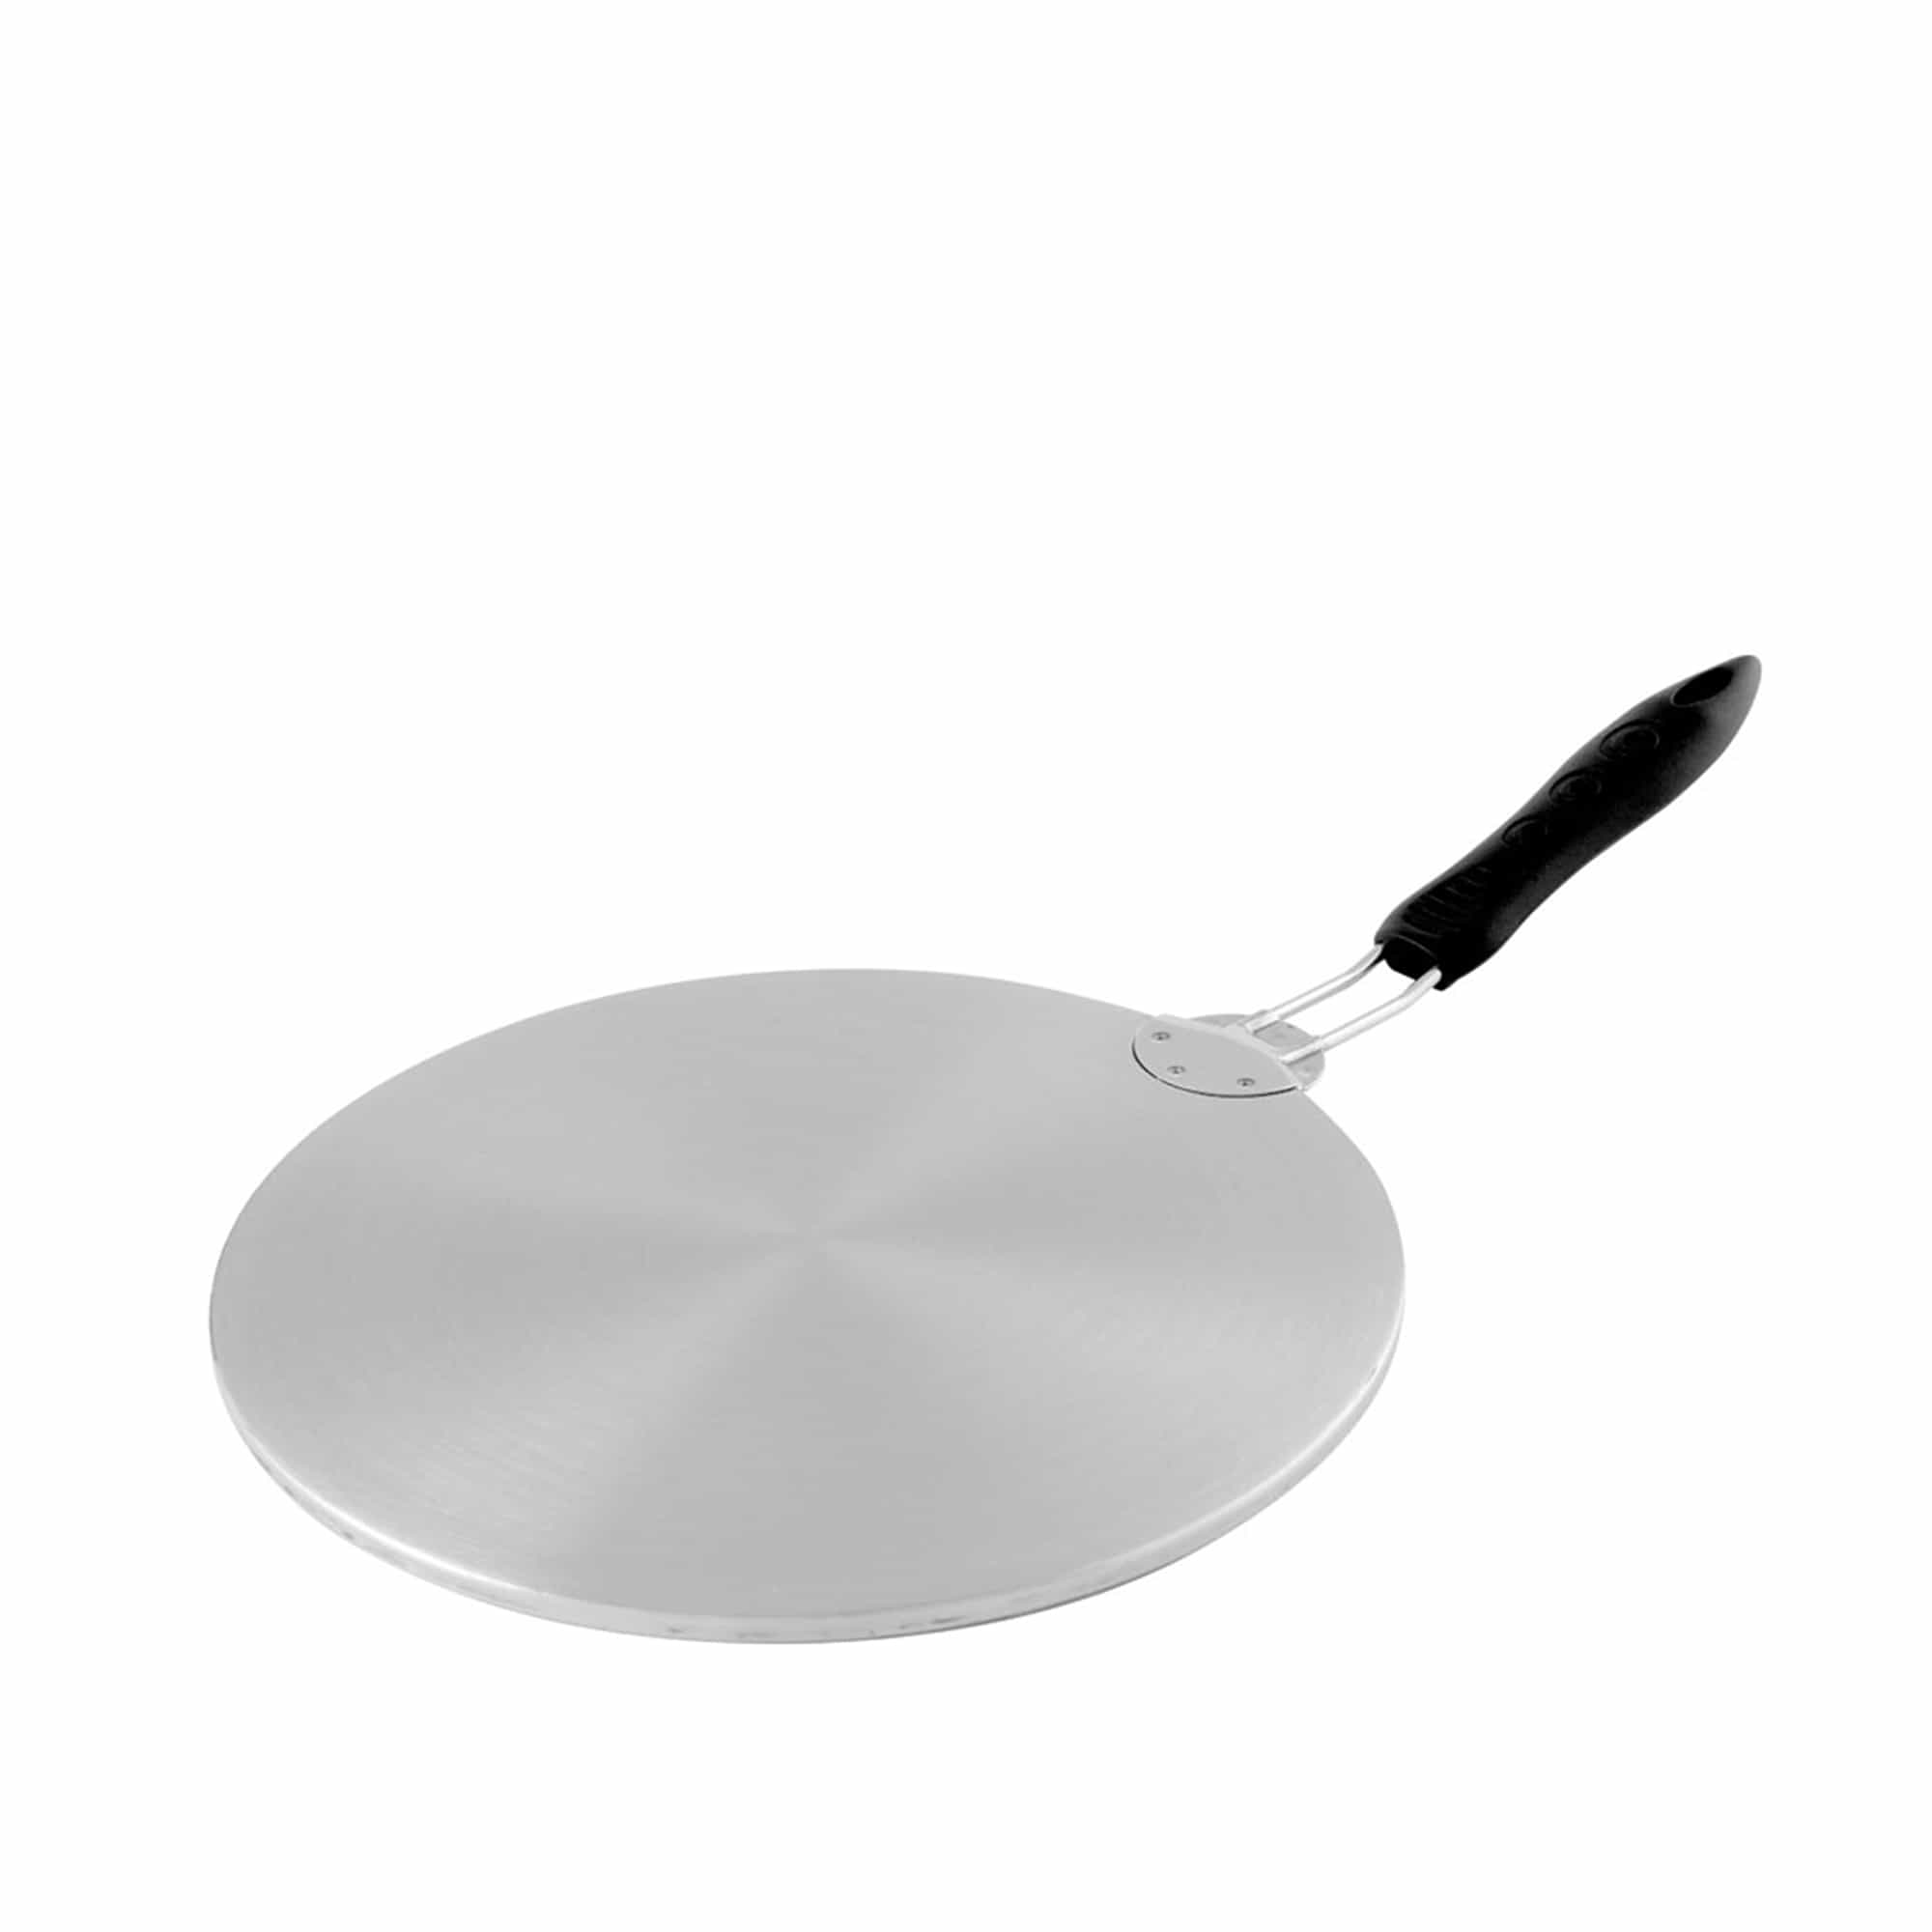 Induction Hob Stainless Steel - 22 cm